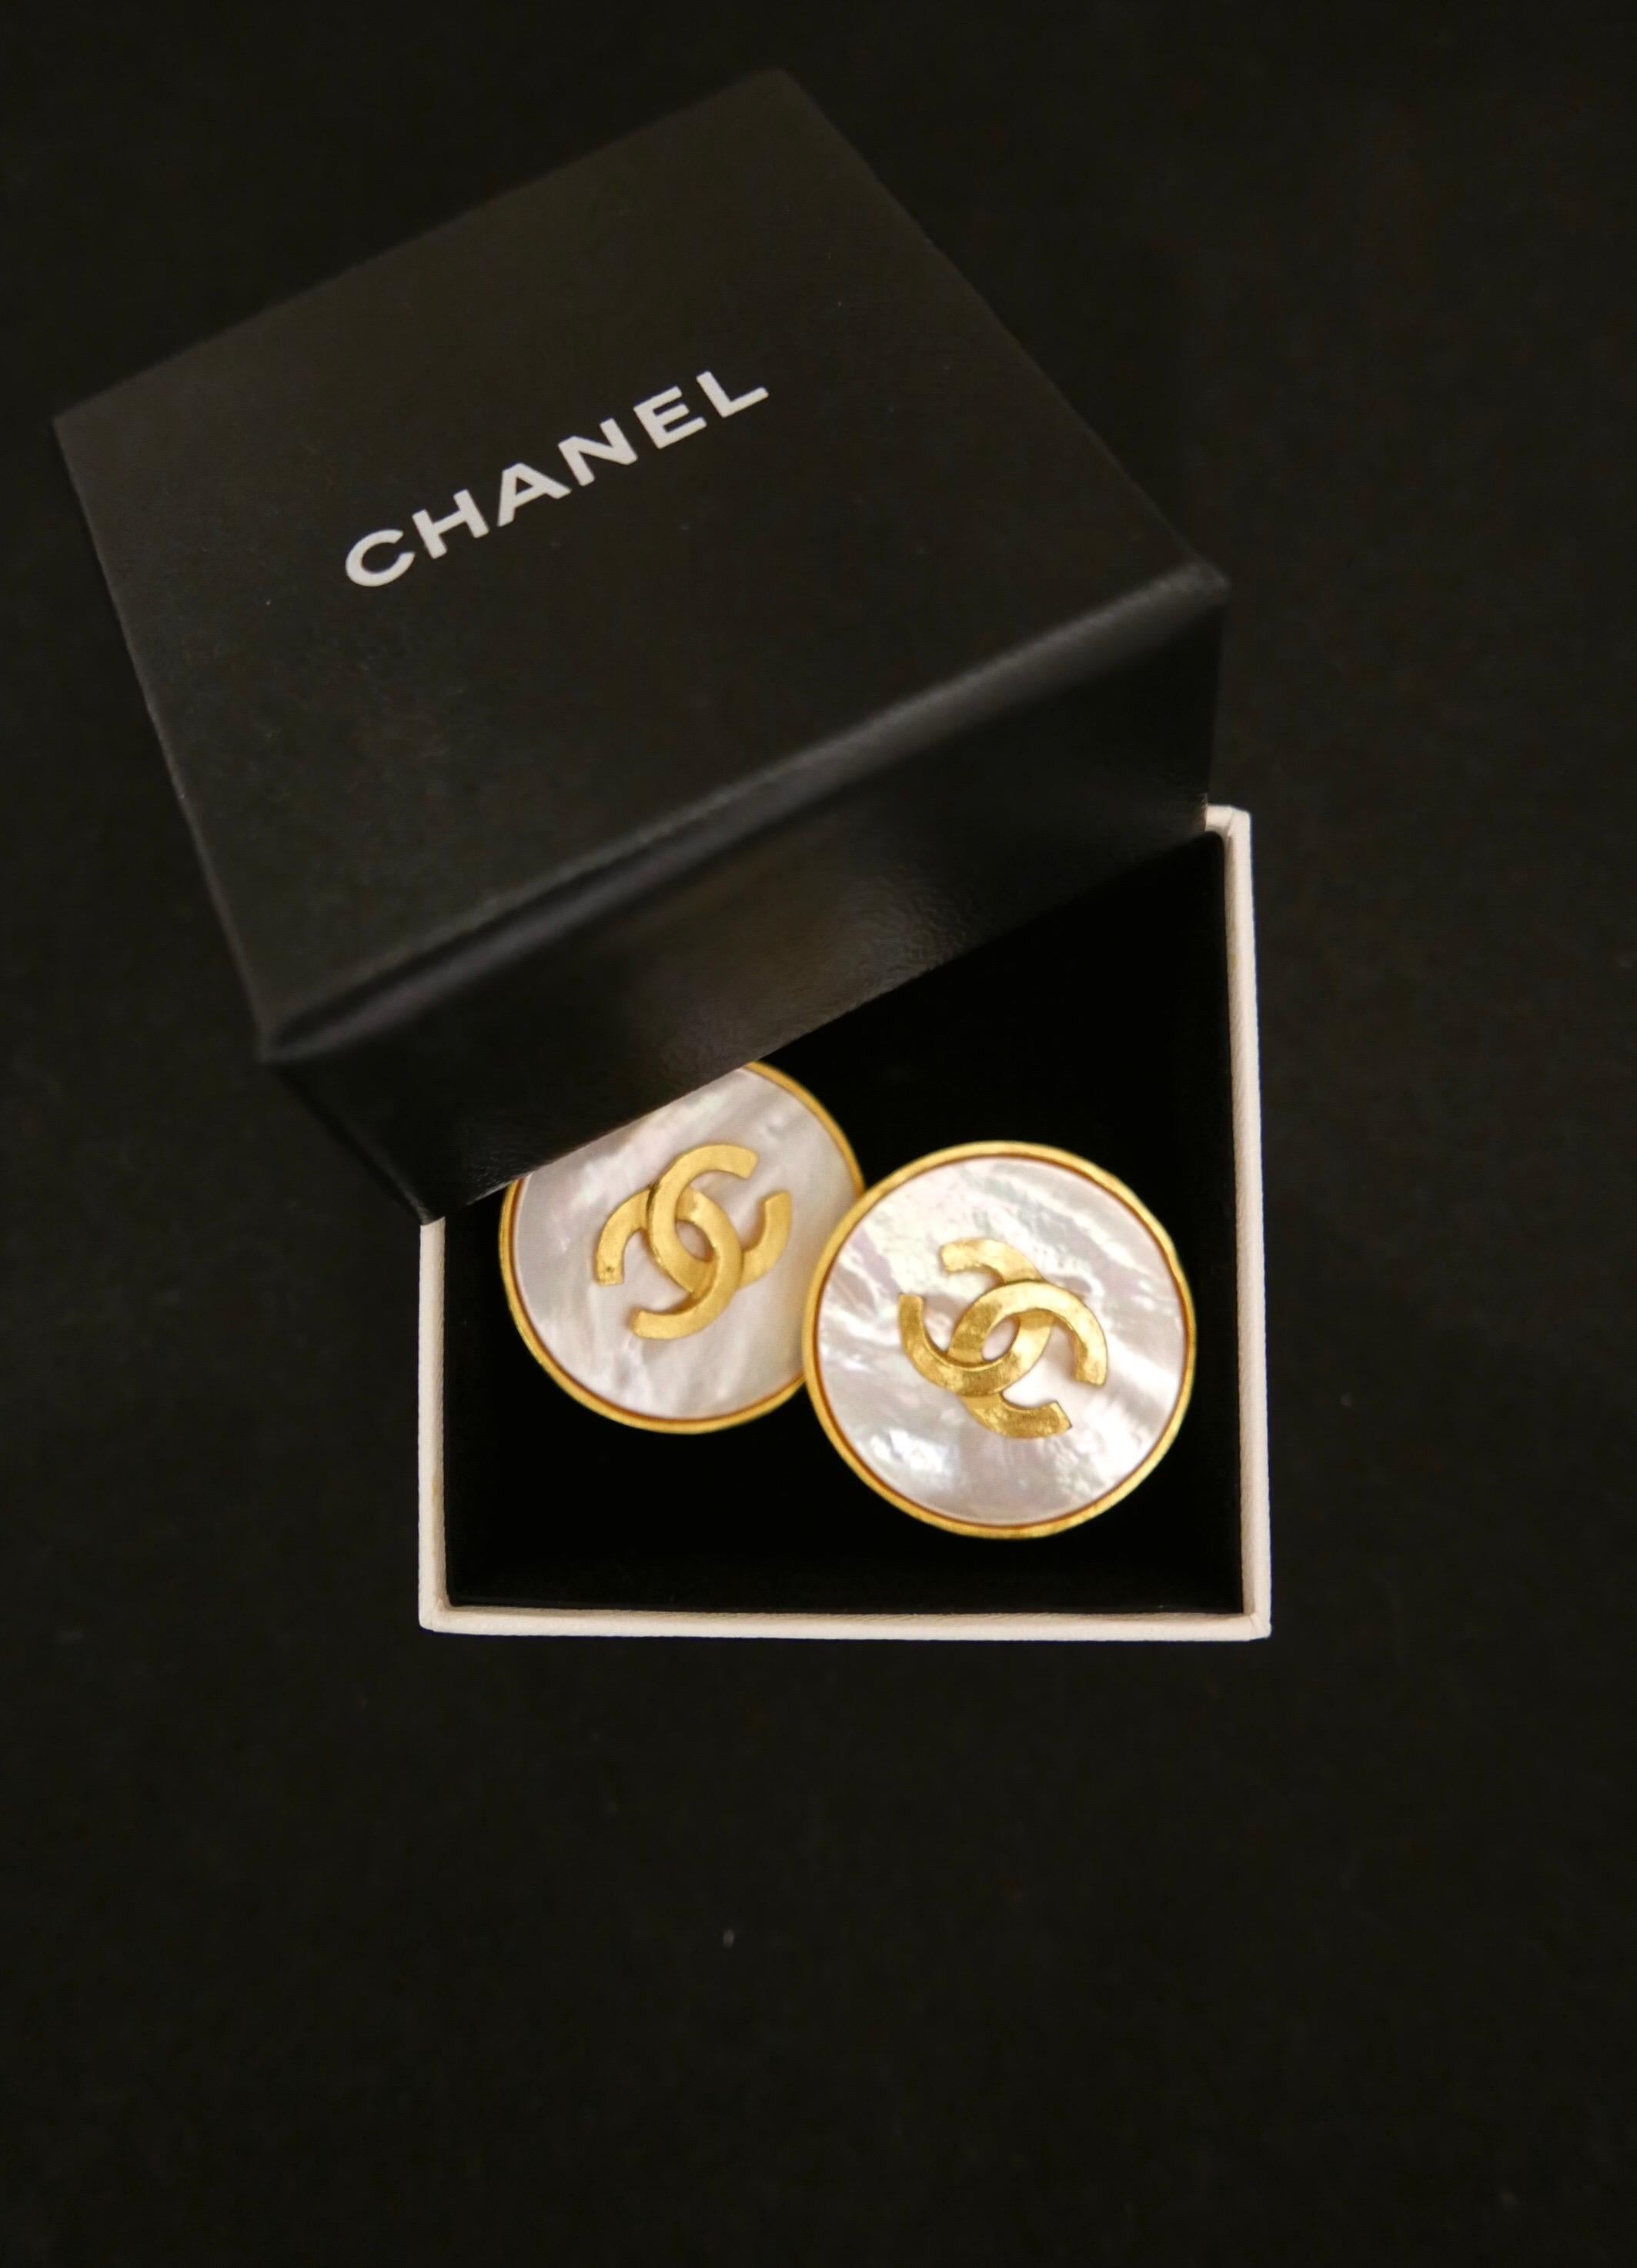 Pair of Chanel jumbo gold toned earclips with gold toned CC logo on a mother of pearl base. Diameter 3.3cm. Stamped 95A made in France. Comes with box.

Condition: Minor signs of use. Generally in very good condition. 